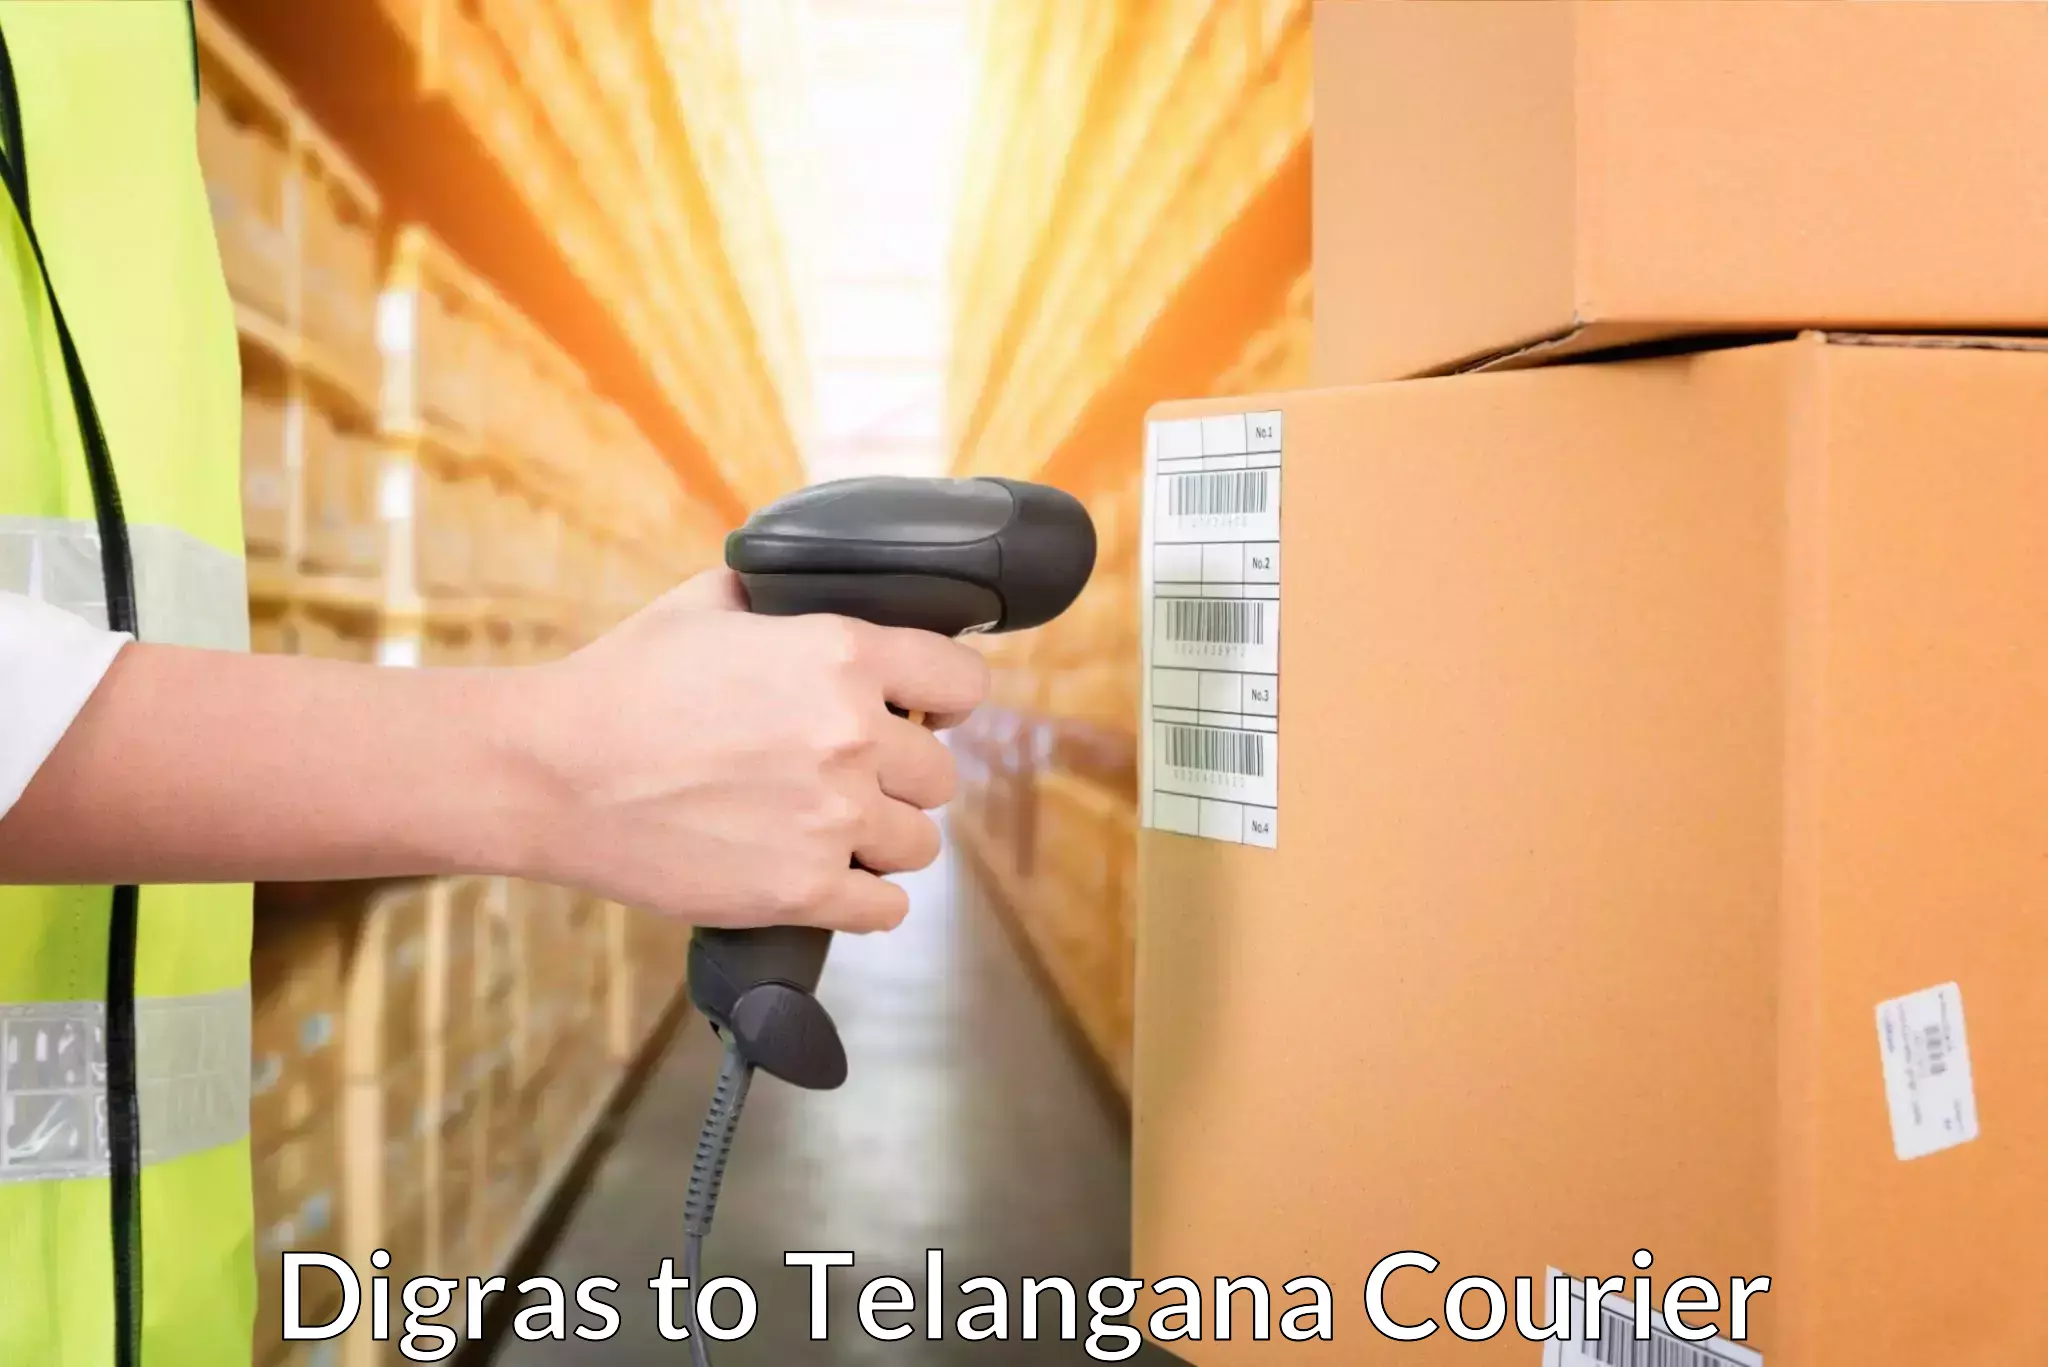 24-hour delivery options Digras to Telangana